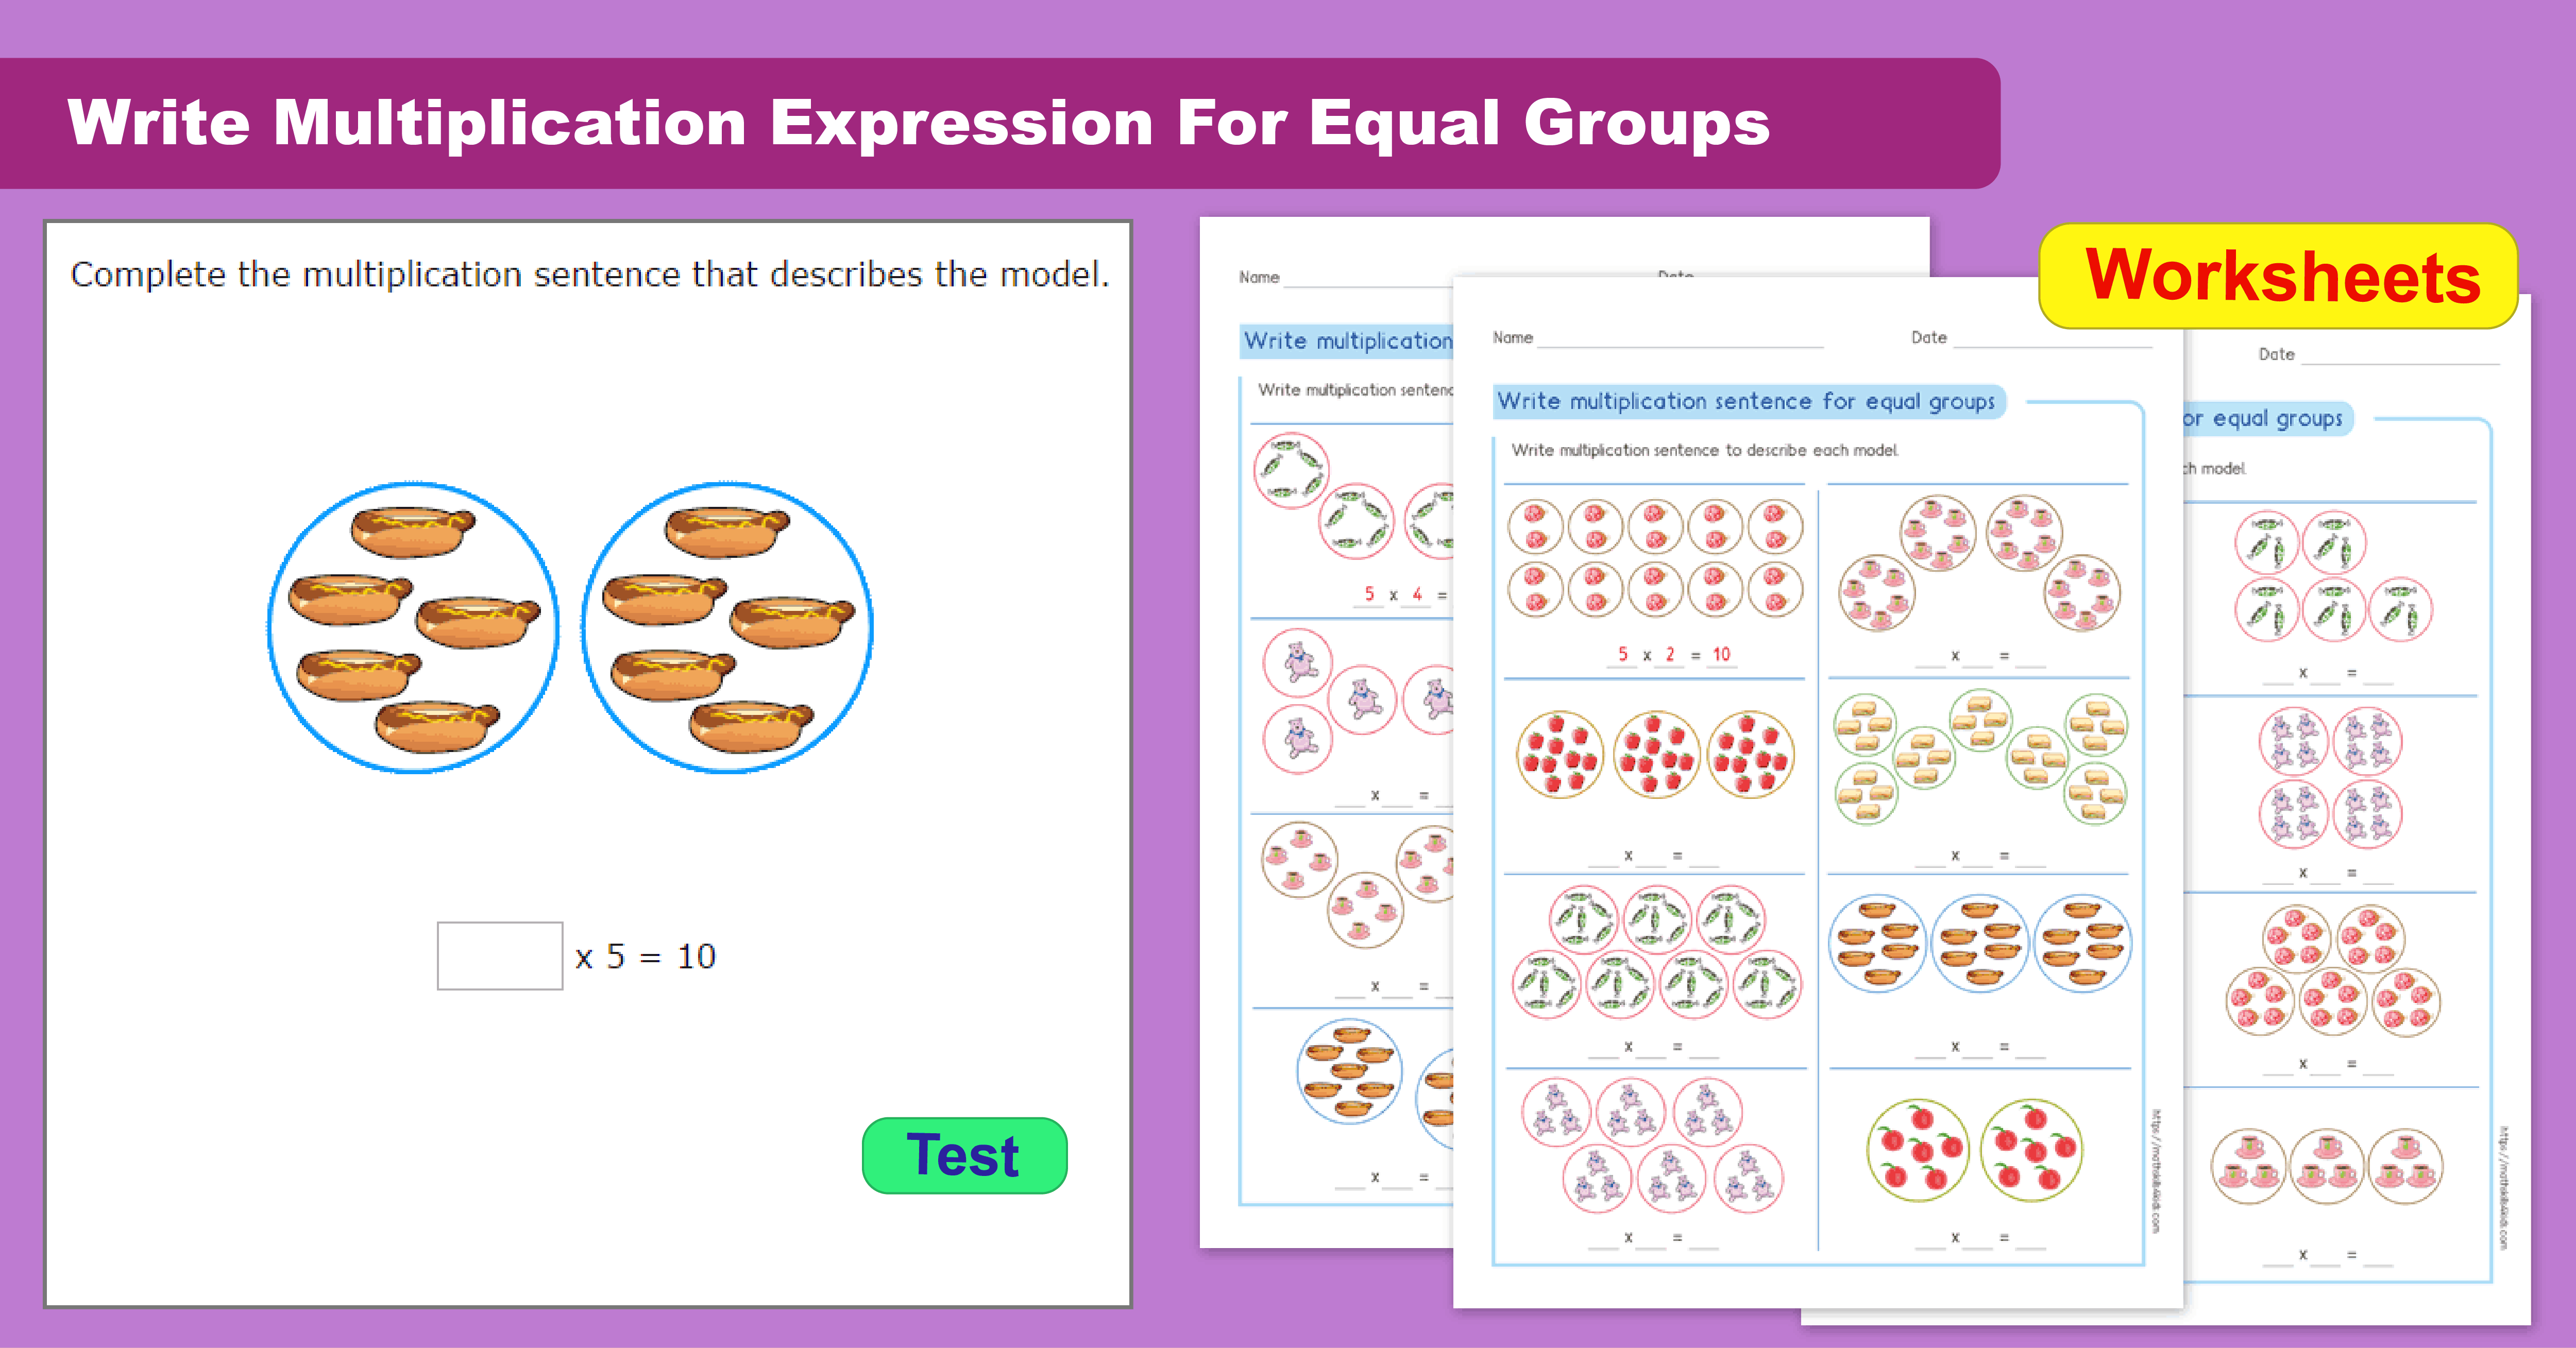 Write Multiplication Expression For Equal Groups Understand Multiplication Concept